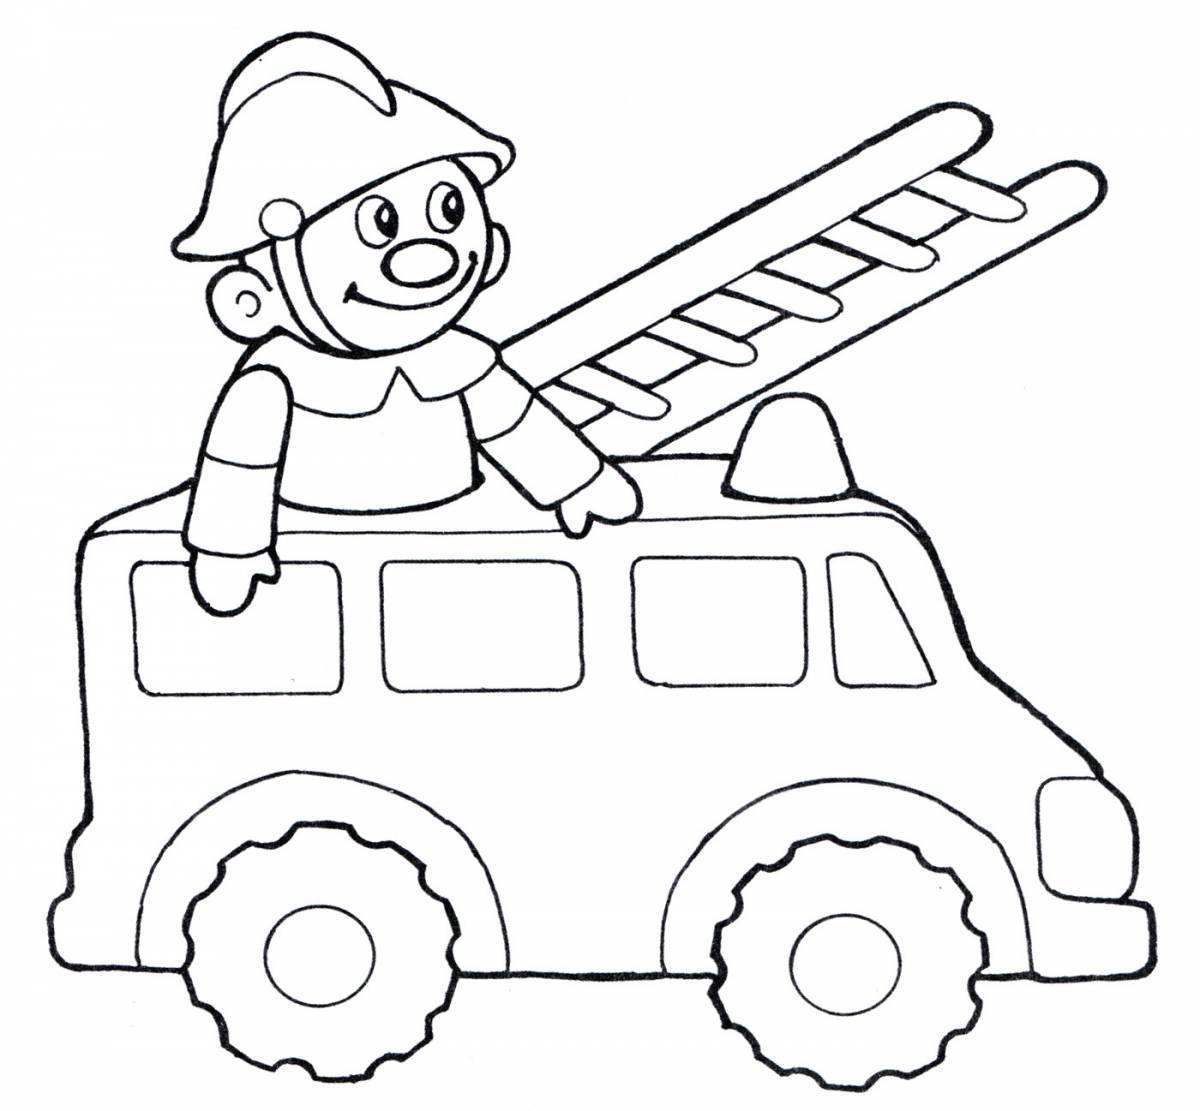 Outstanding fire truck coloring page for kids